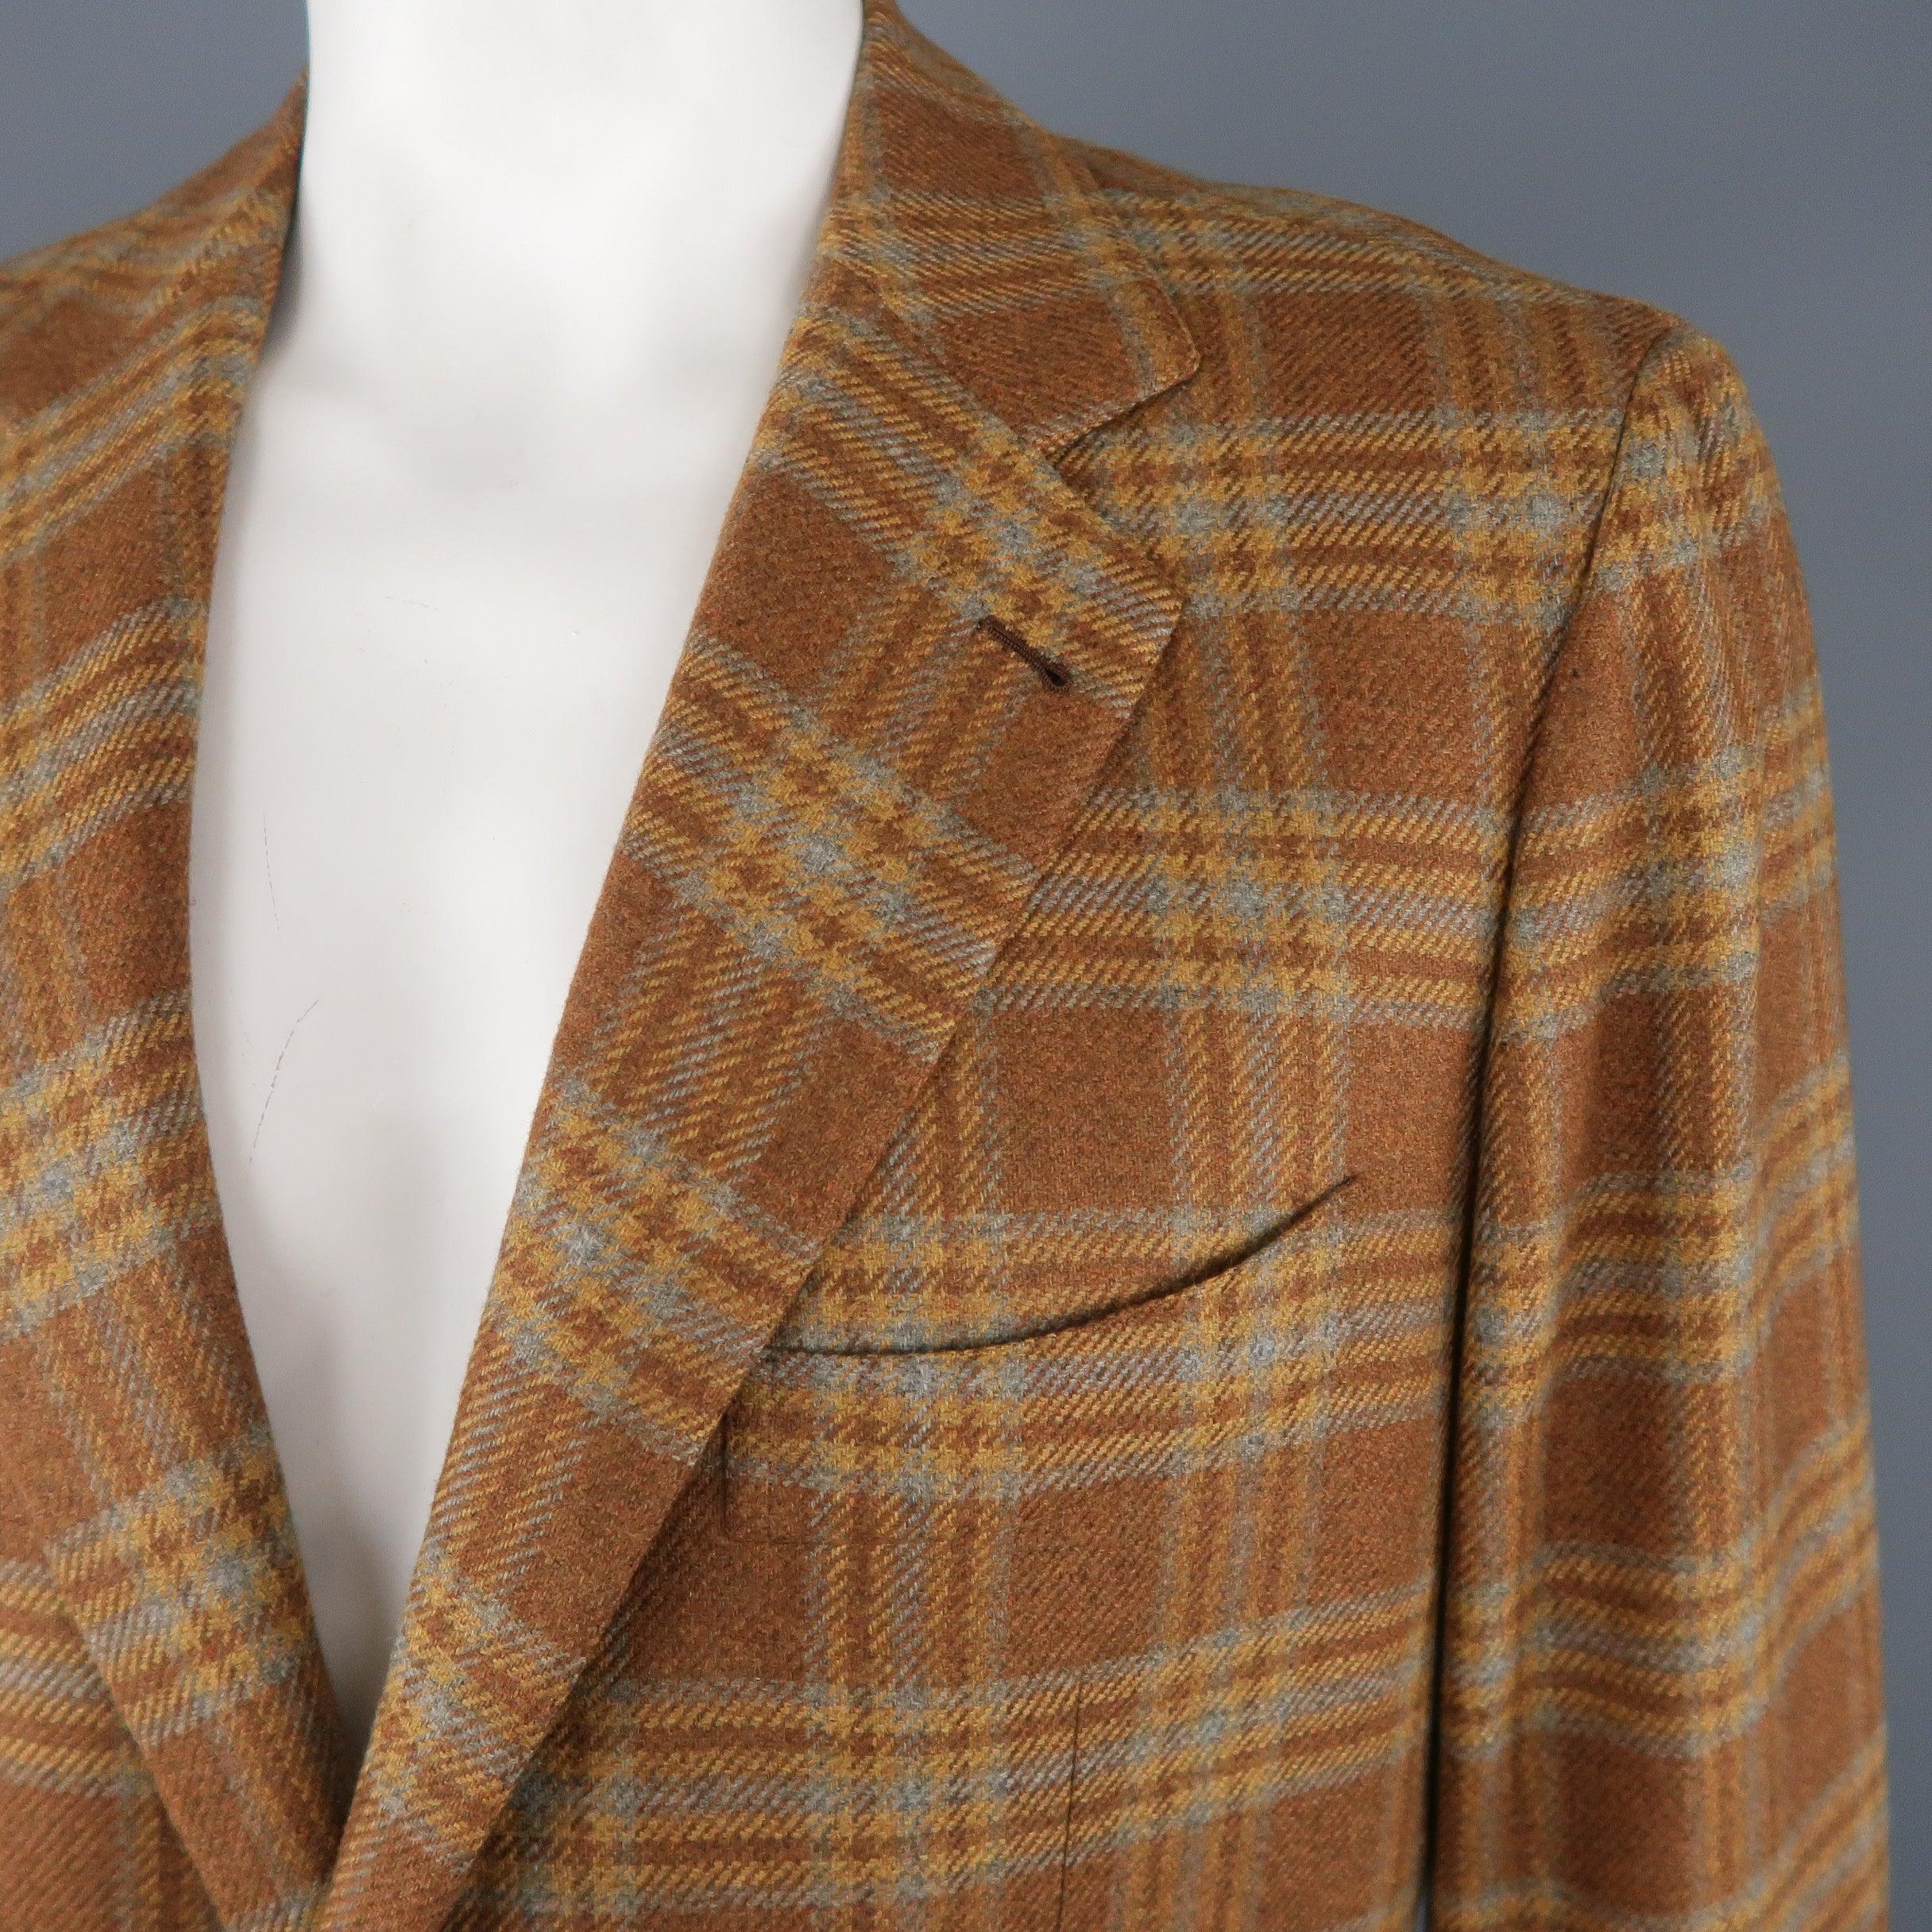 BORRELLI sport coat comes in light brown, blue & gold plaid cashmere with a notch lapel, two button, single breasted front, and flap pockets. Made in Italy.Excellent Pre-Owned Condition. 

Marked:   SM 

Measurements: 
 
Shoulder: 18.5 inches Chest: